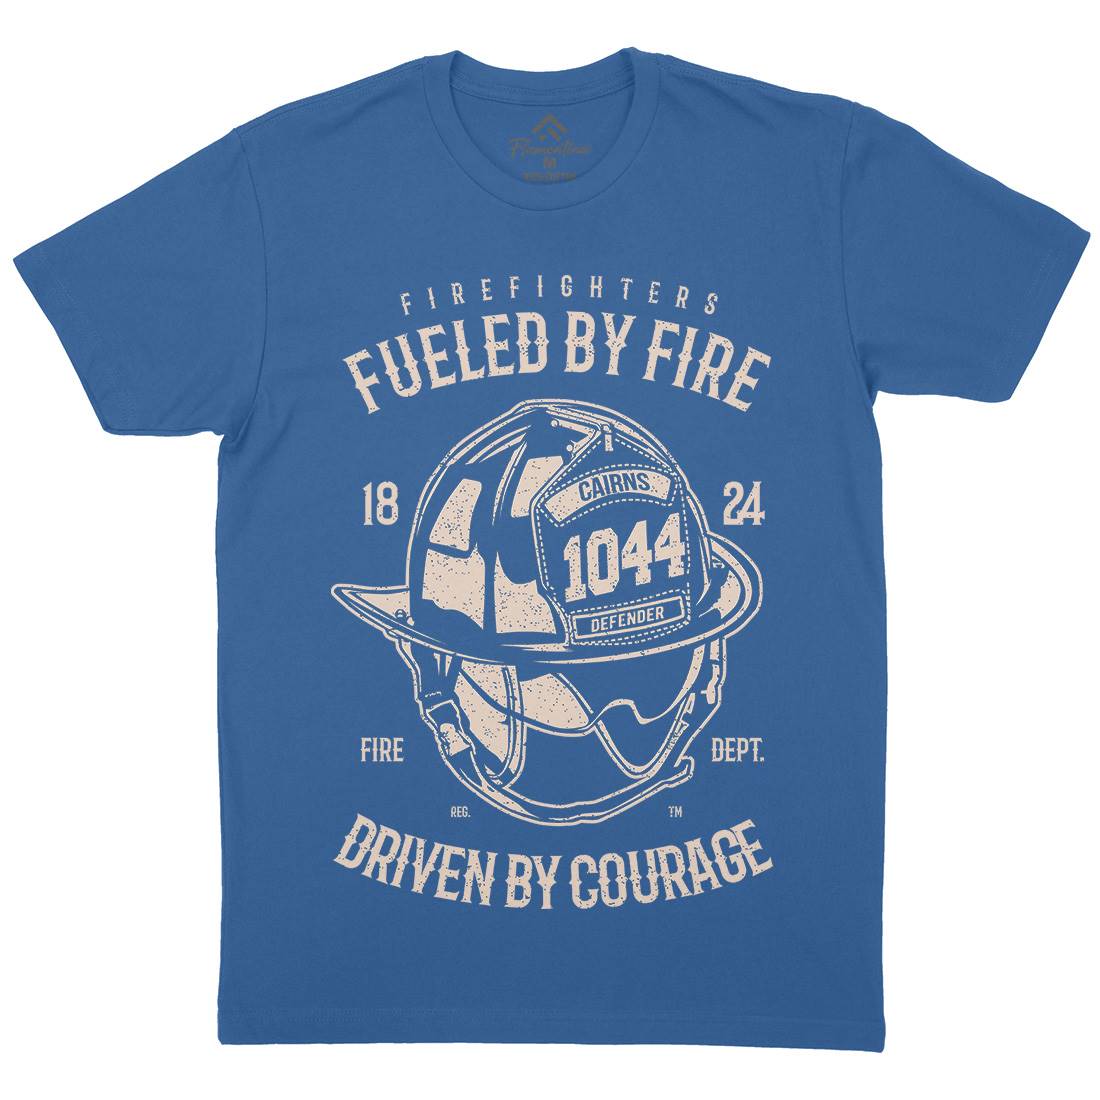 Fuelled By Fire Mens Organic Crew Neck T-Shirt Firefighters A667